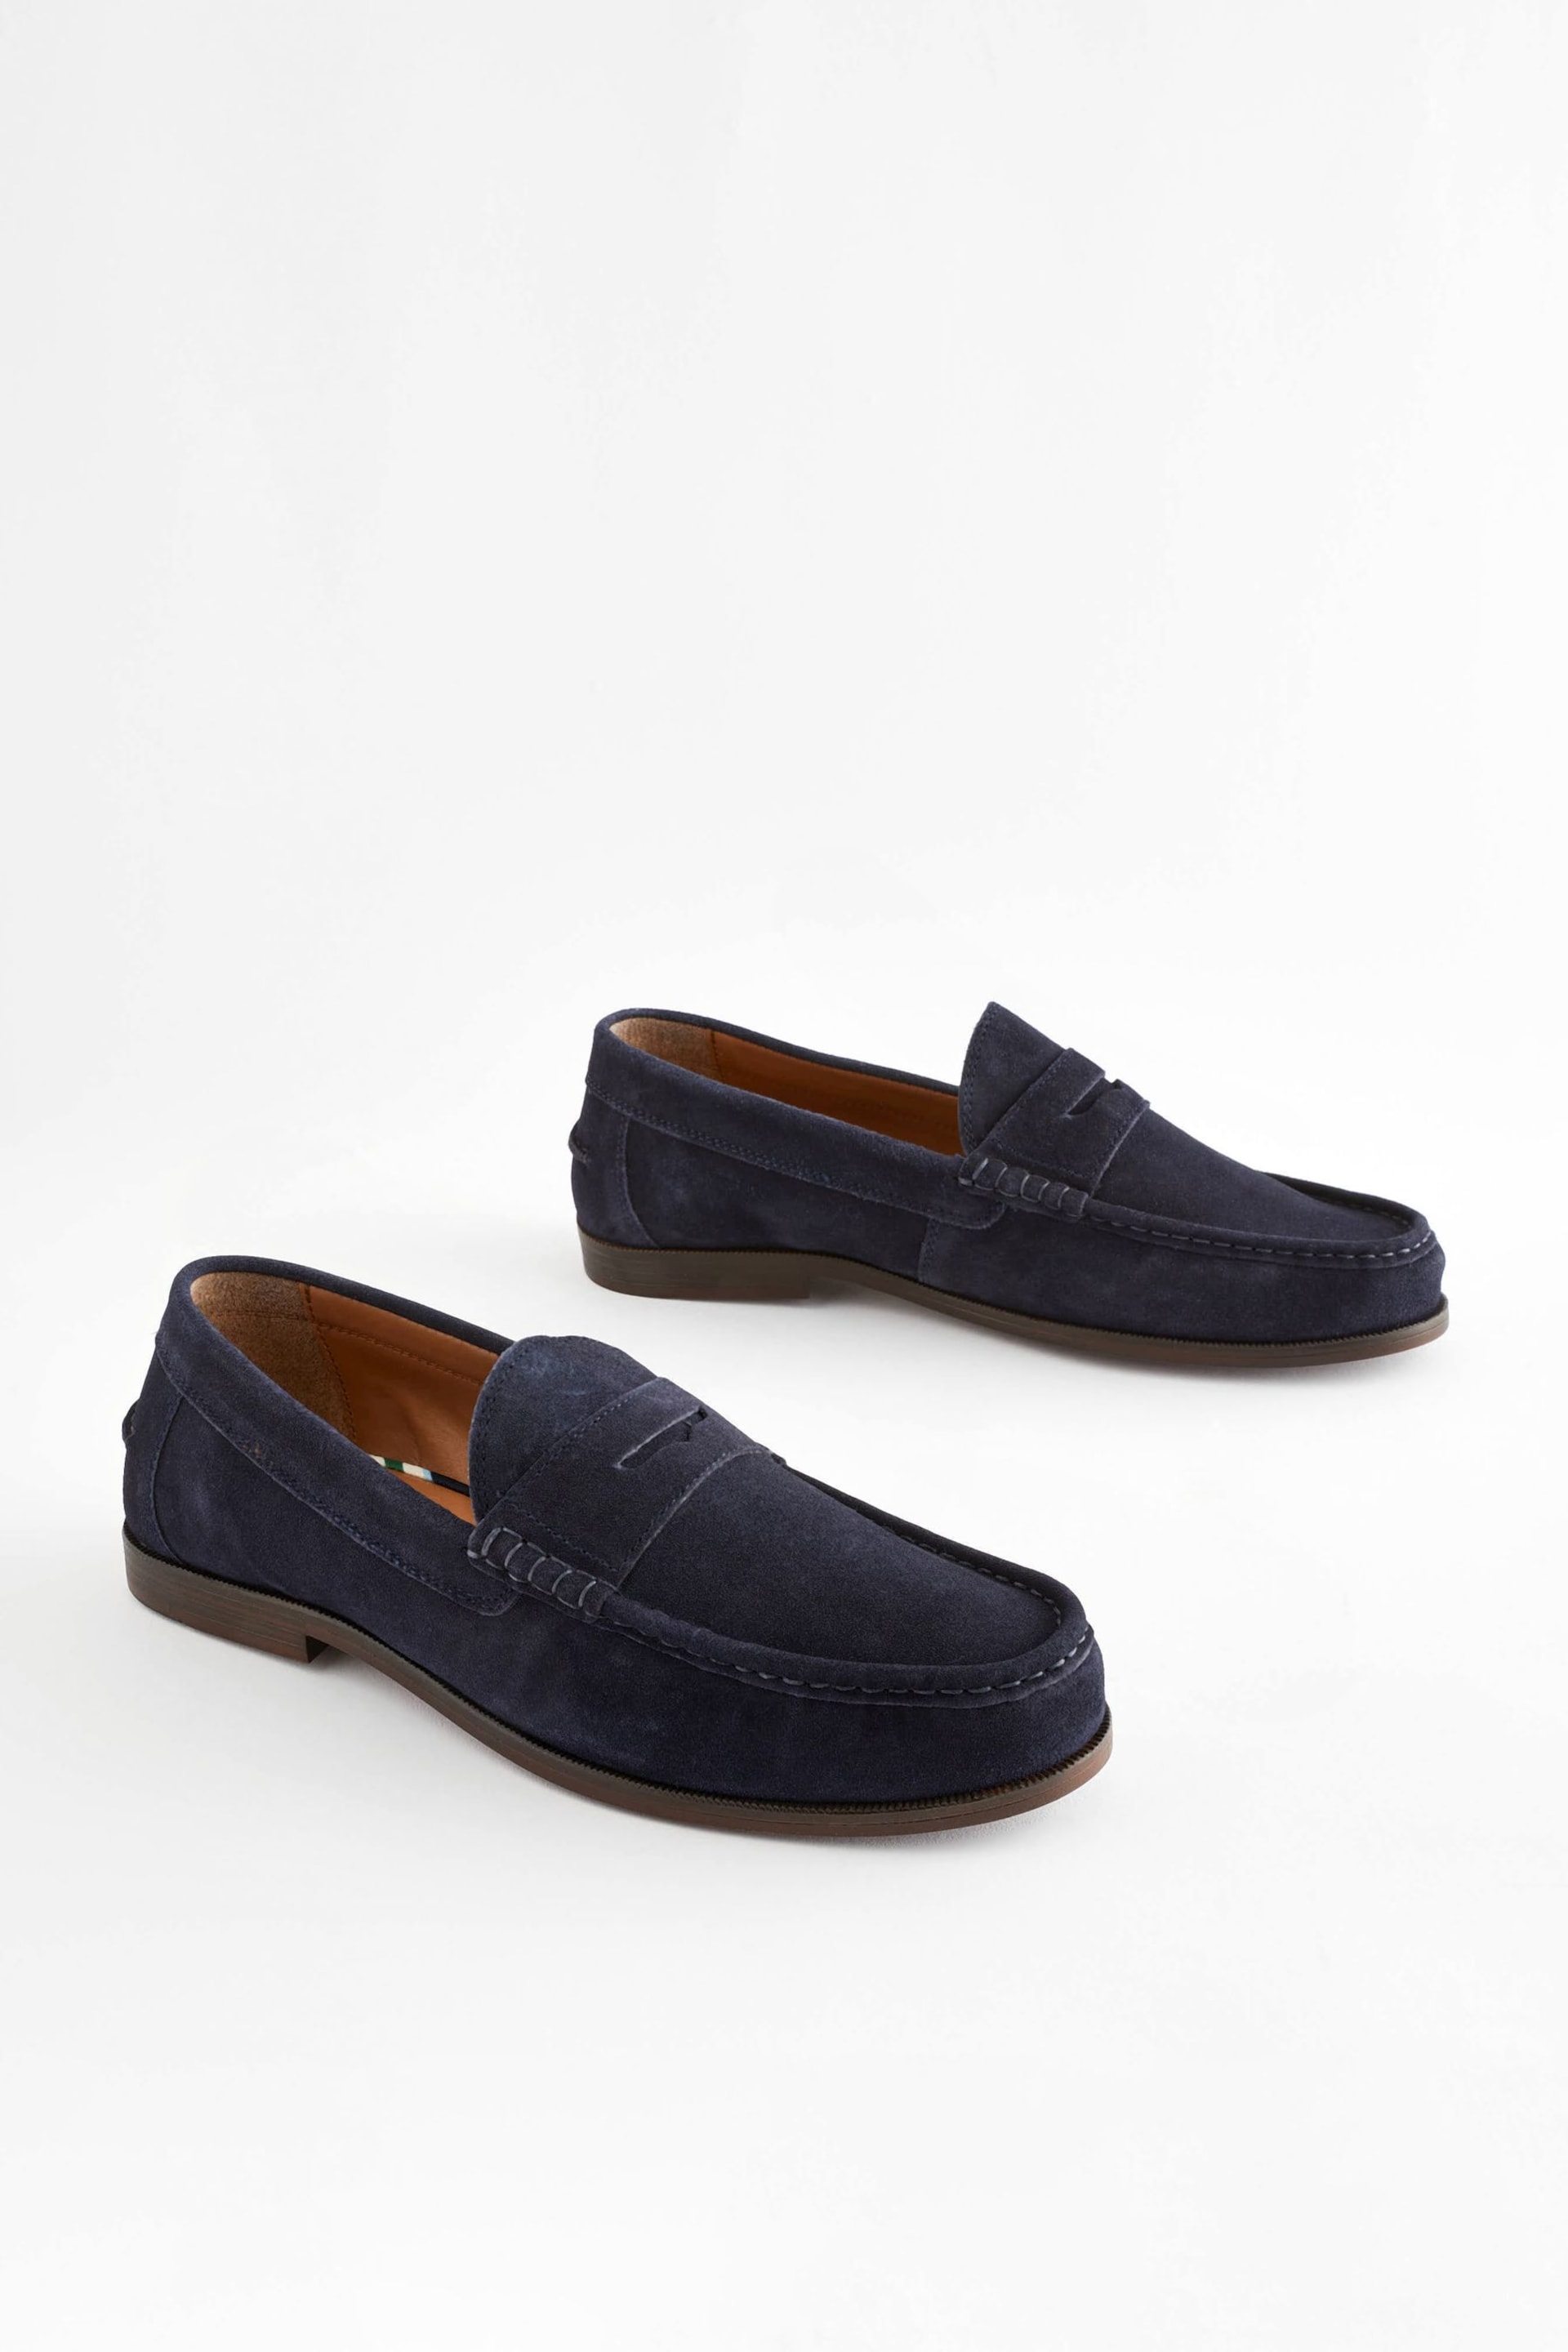 Navy Blue Suede Wide Fit Penny Loafers - Image 2 of 6